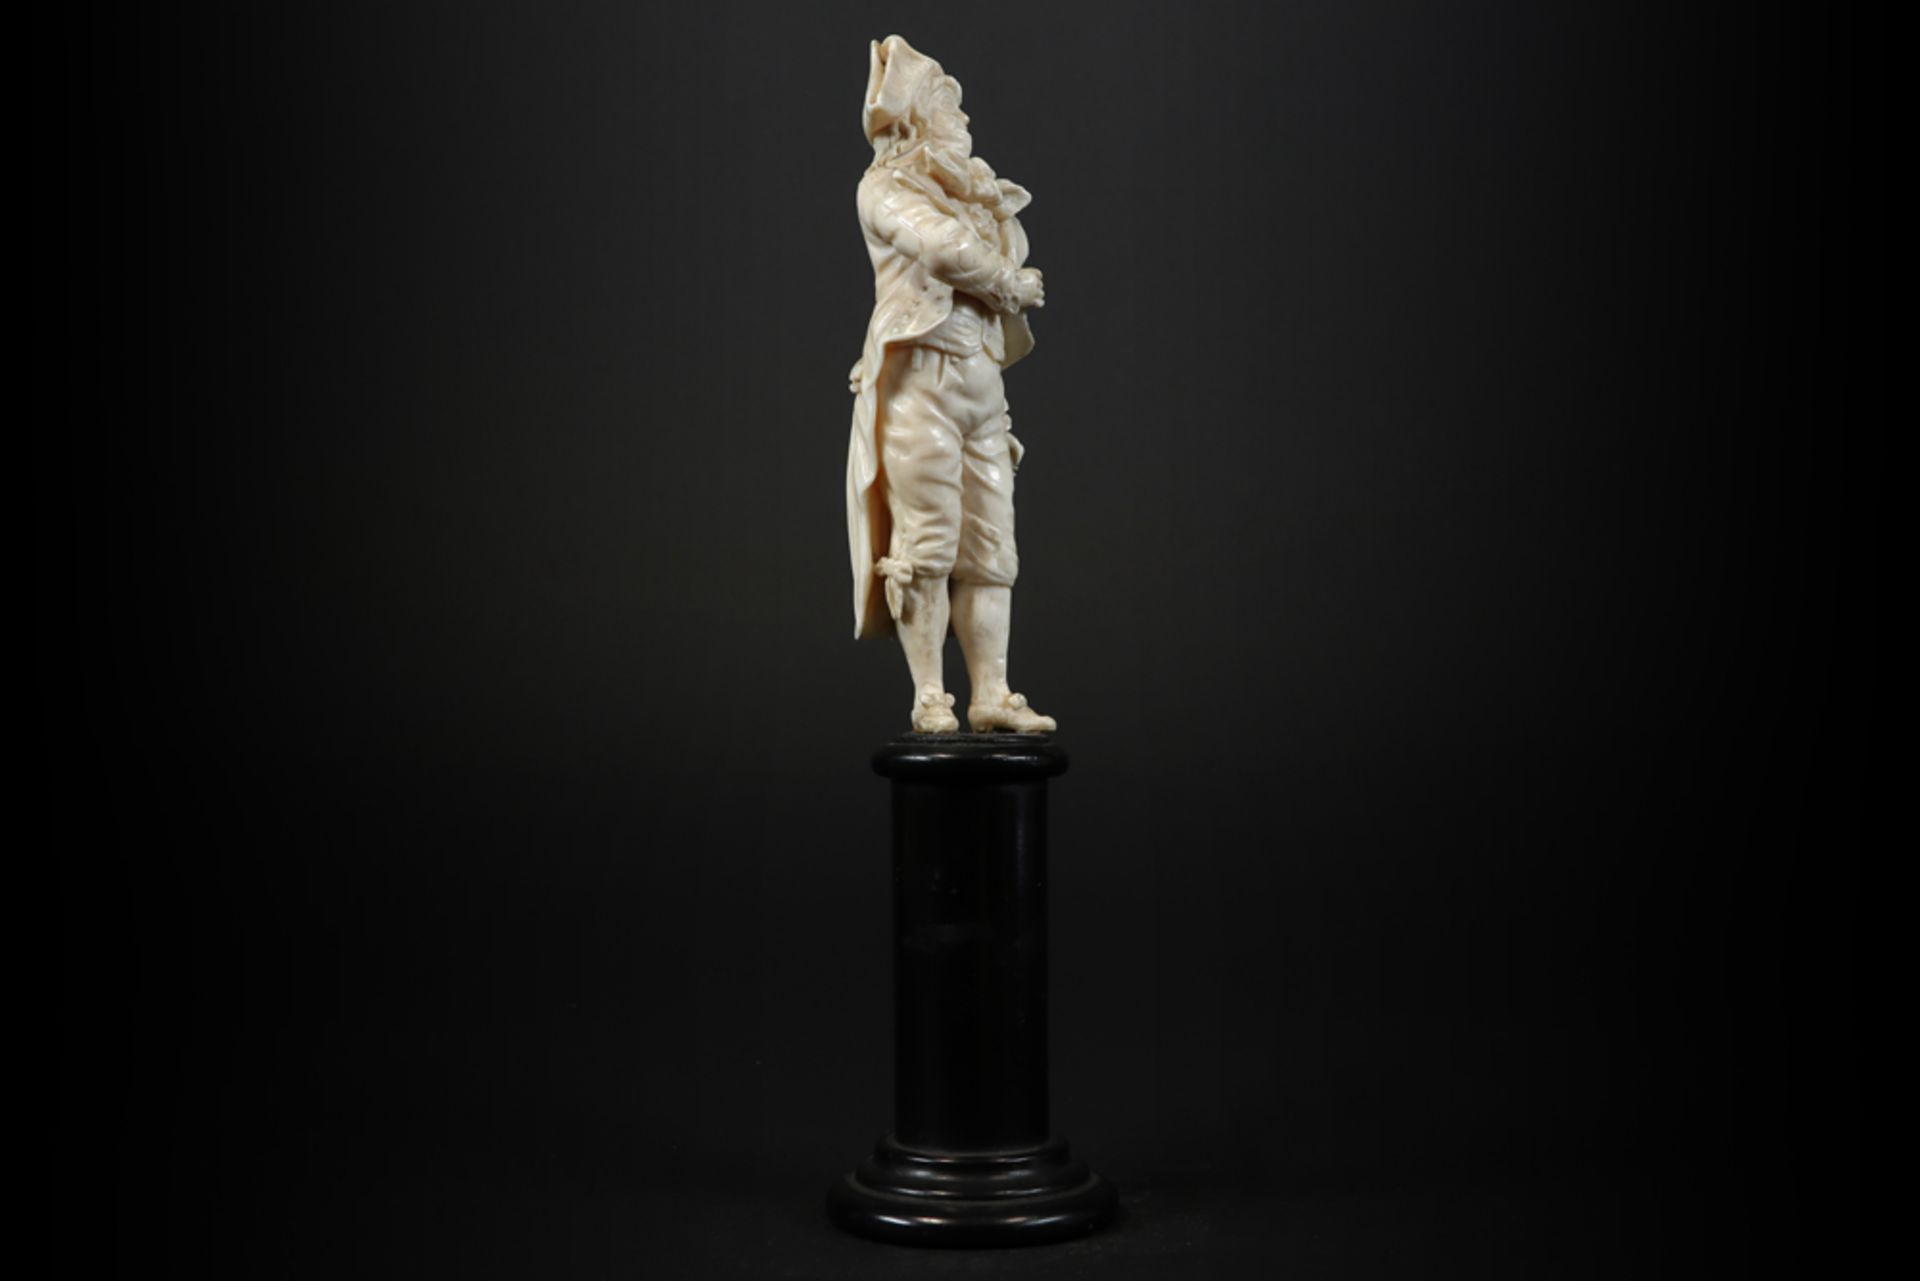 19th Cent. French sculpture in ivory, probably made in Dieppe - with European CITES certificate || - Image 3 of 5